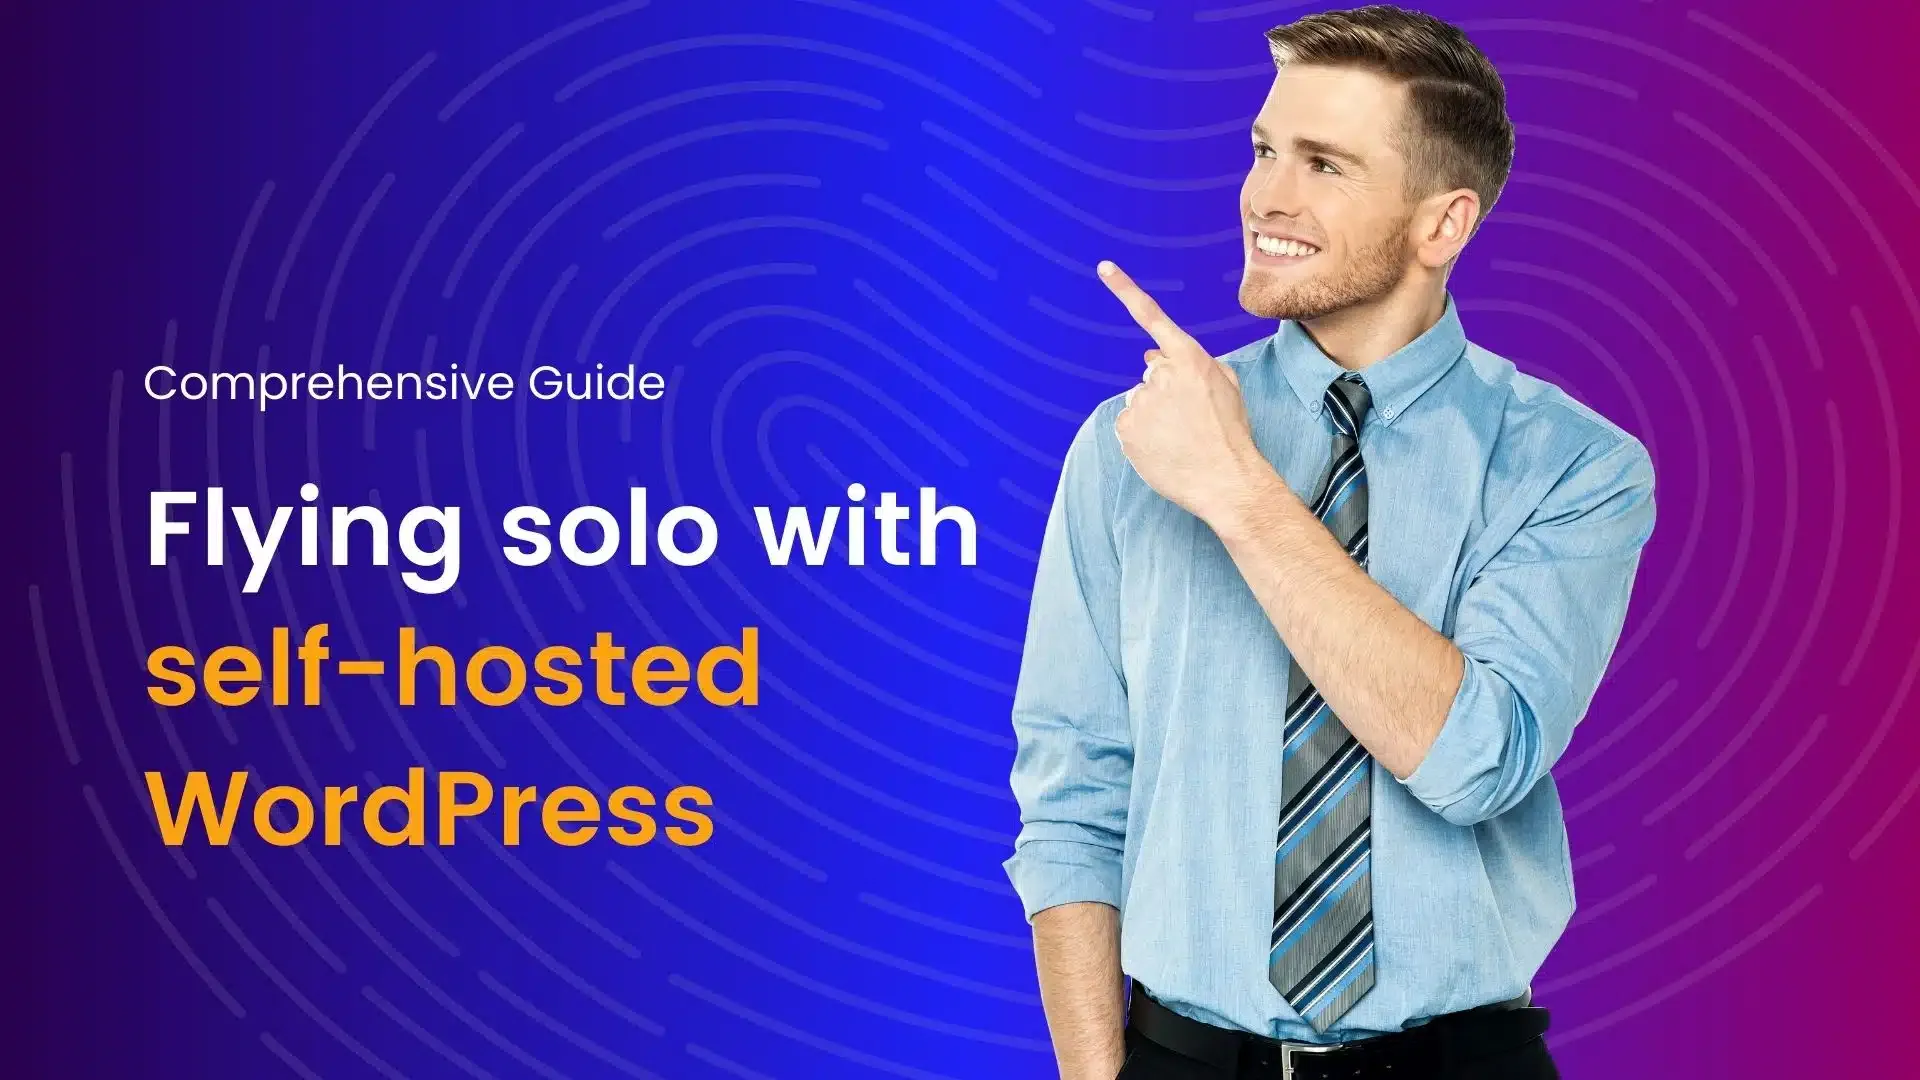 Flying solo with self-hosted WordPress